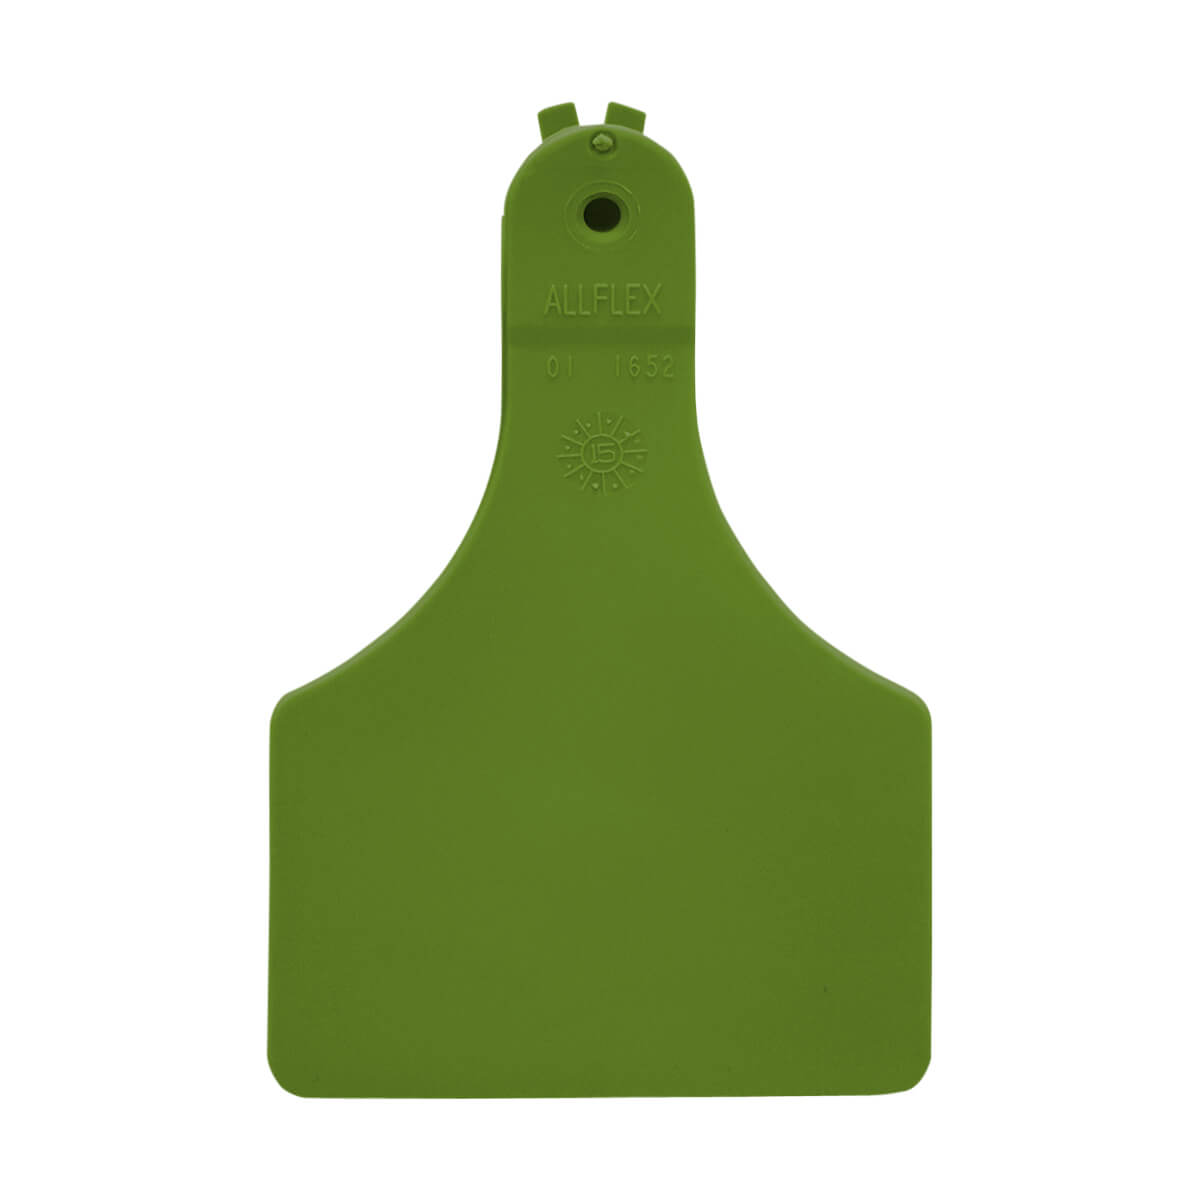 ATag One-Piece Calf Tag - Green - 25 Pack